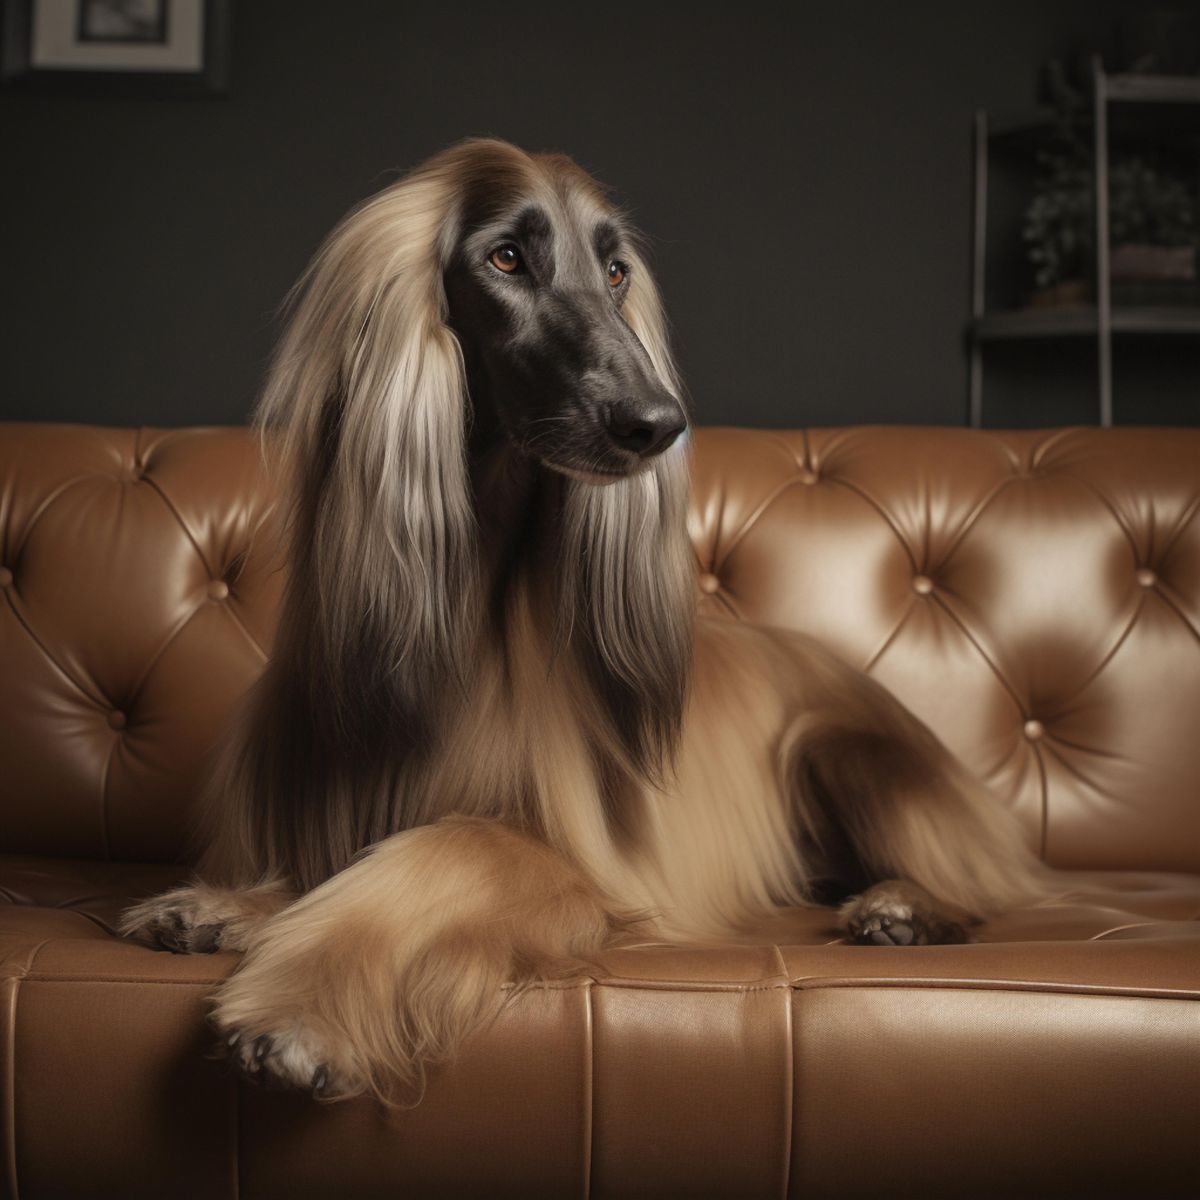 Afghan Hound on a couch.